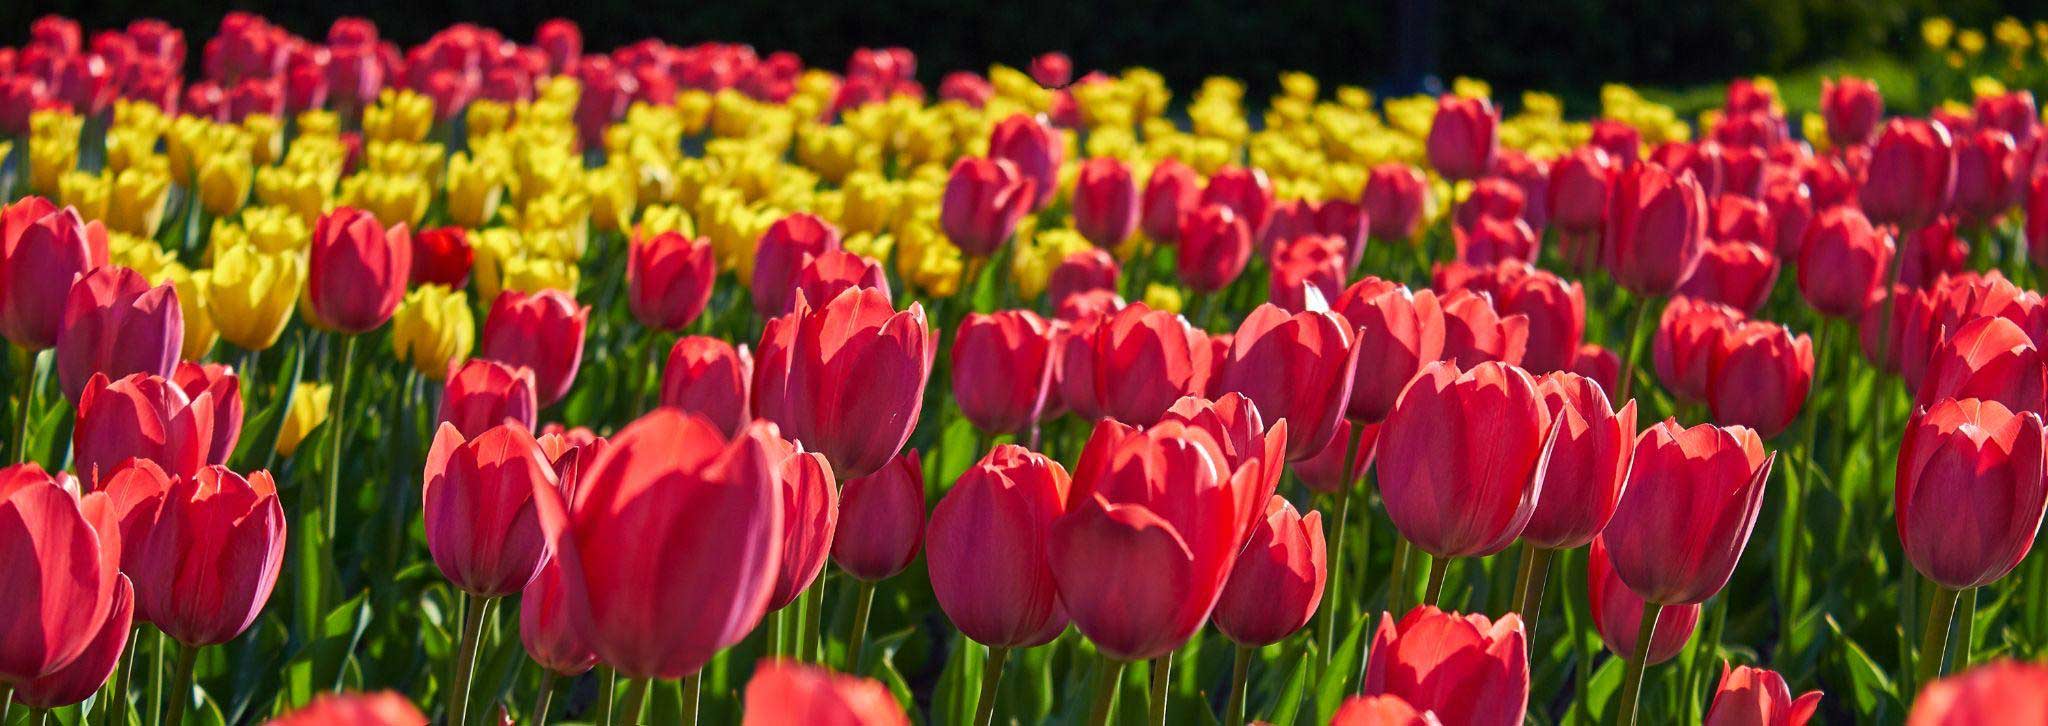 Everyone Loves Tulips - Article onThursd